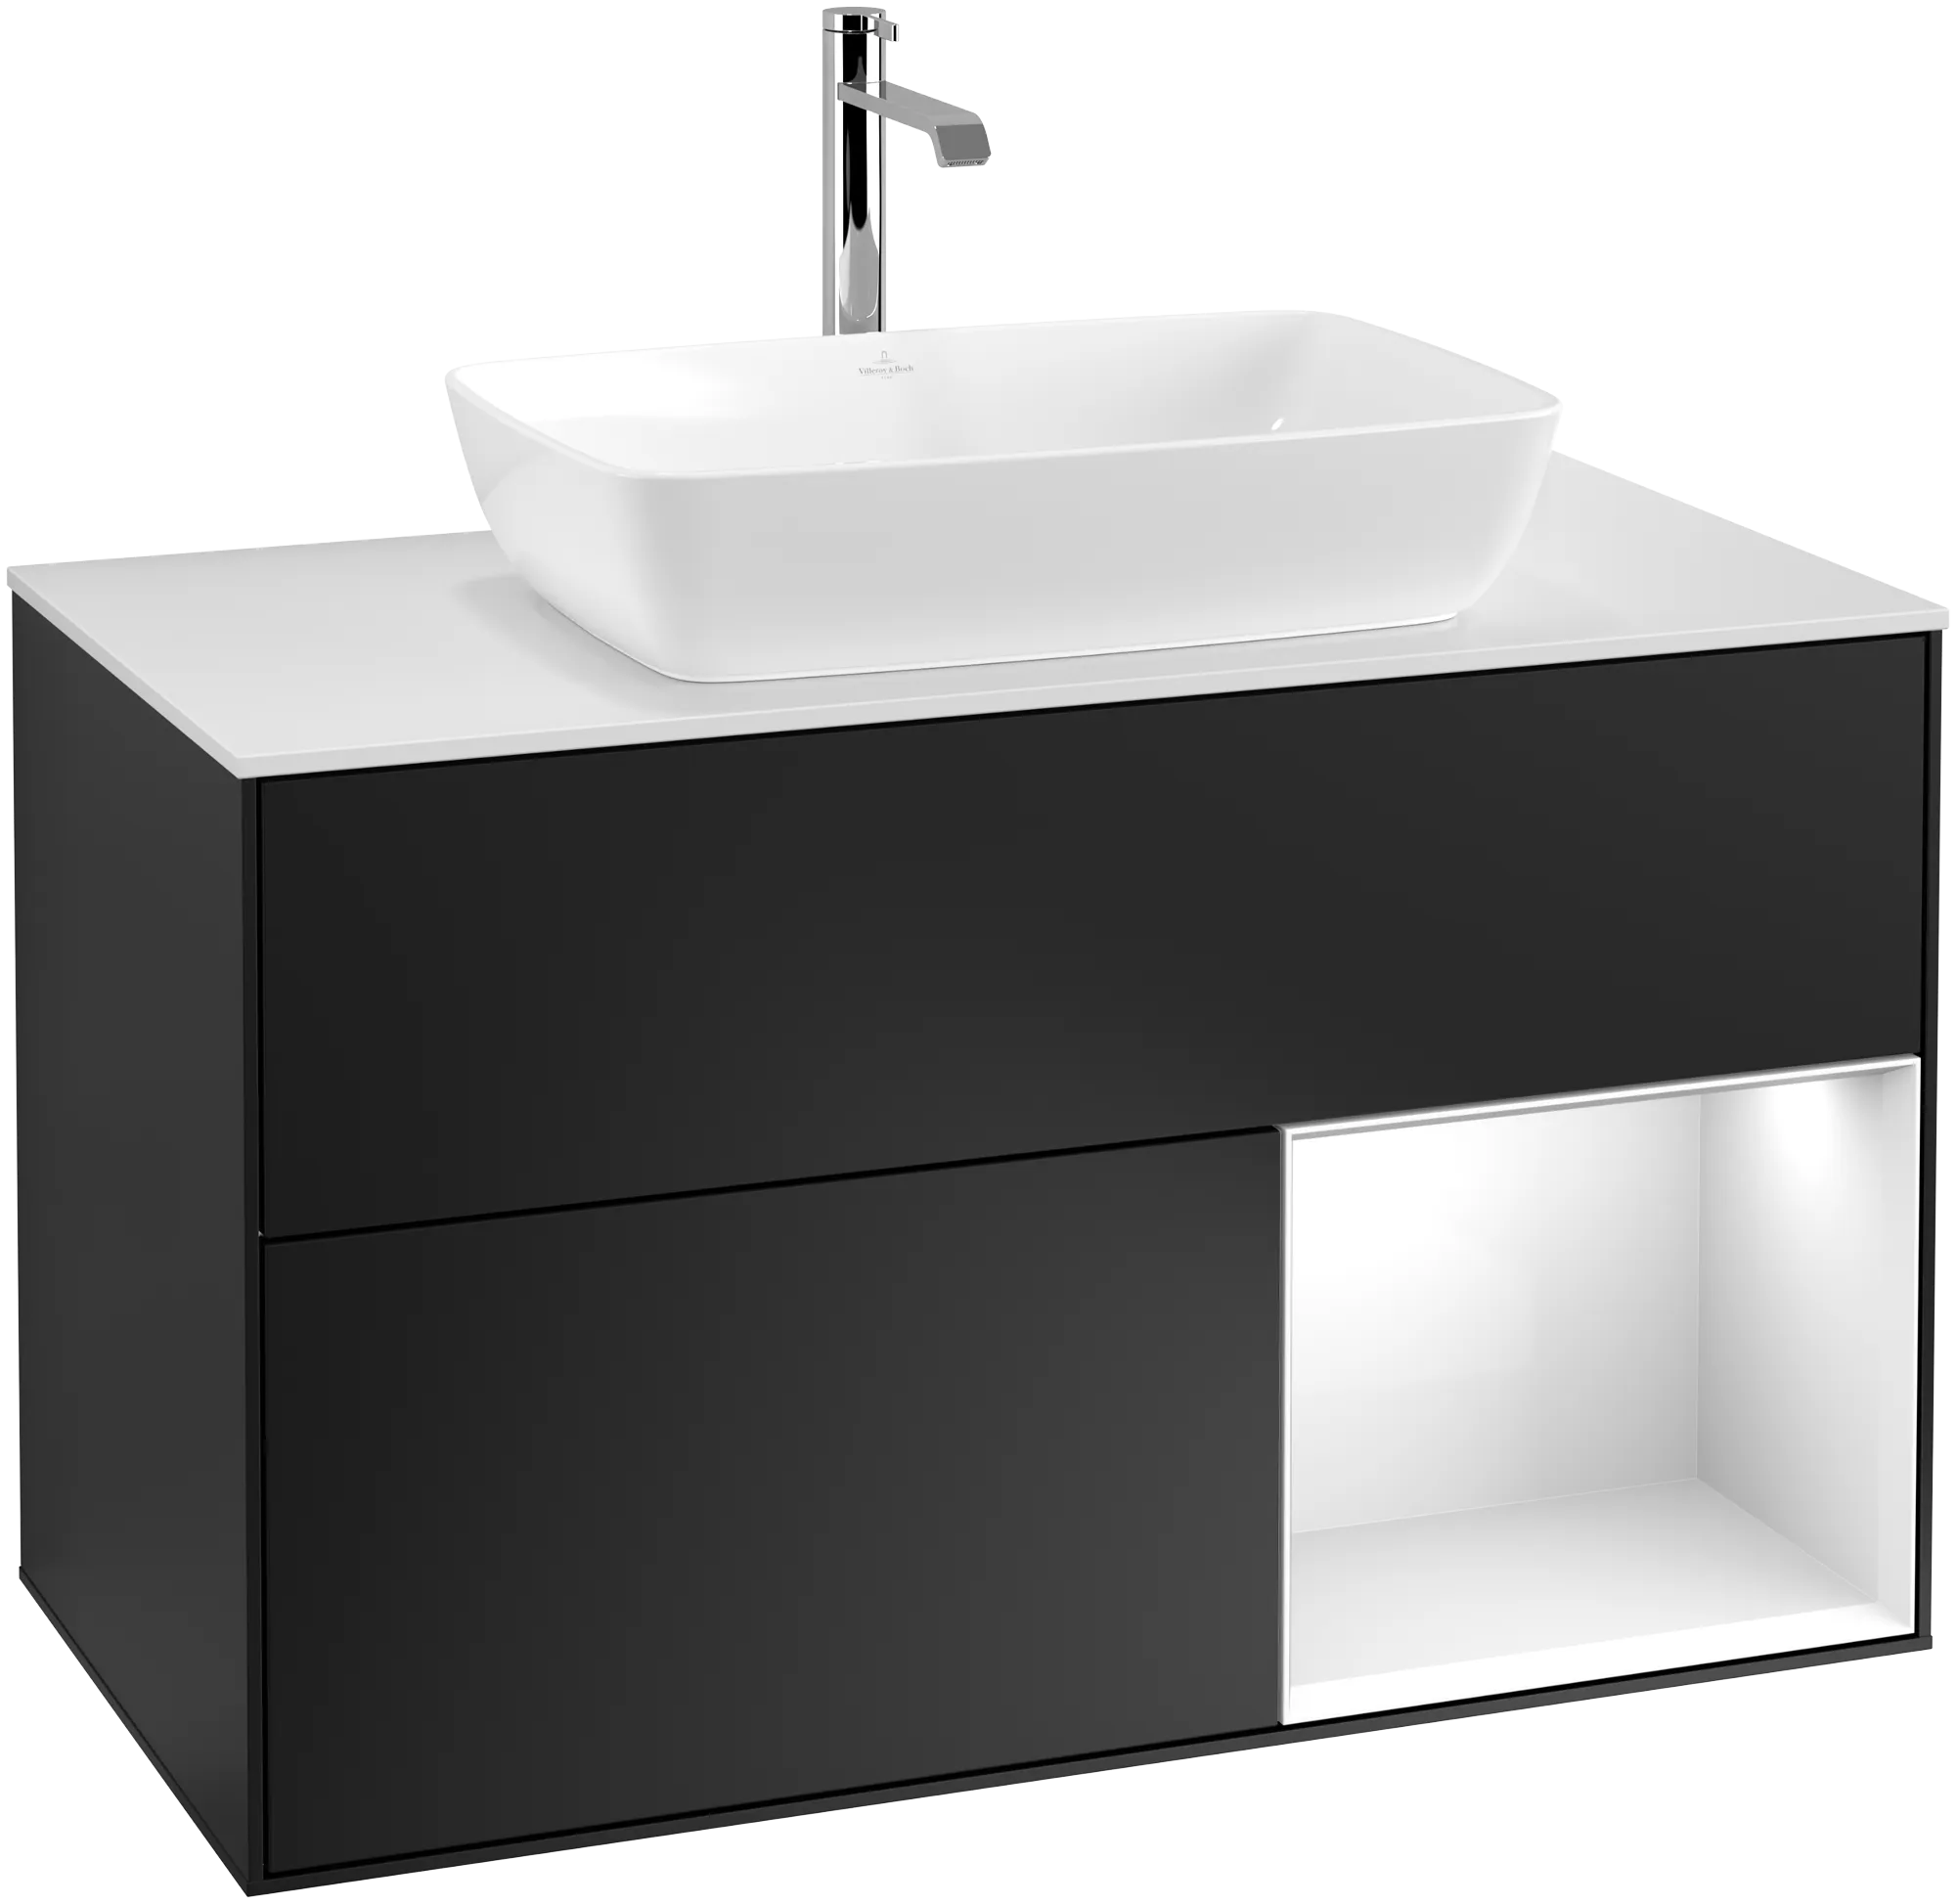 Obrázek VILLEROY BOCH Finion Vanity unit, with lighting, 2 pull-out compartments, 1000 x 603 x 501 mm, Black Matt Lacquer / Glossy White Lacquer / Glass White Matt #G781GFPD